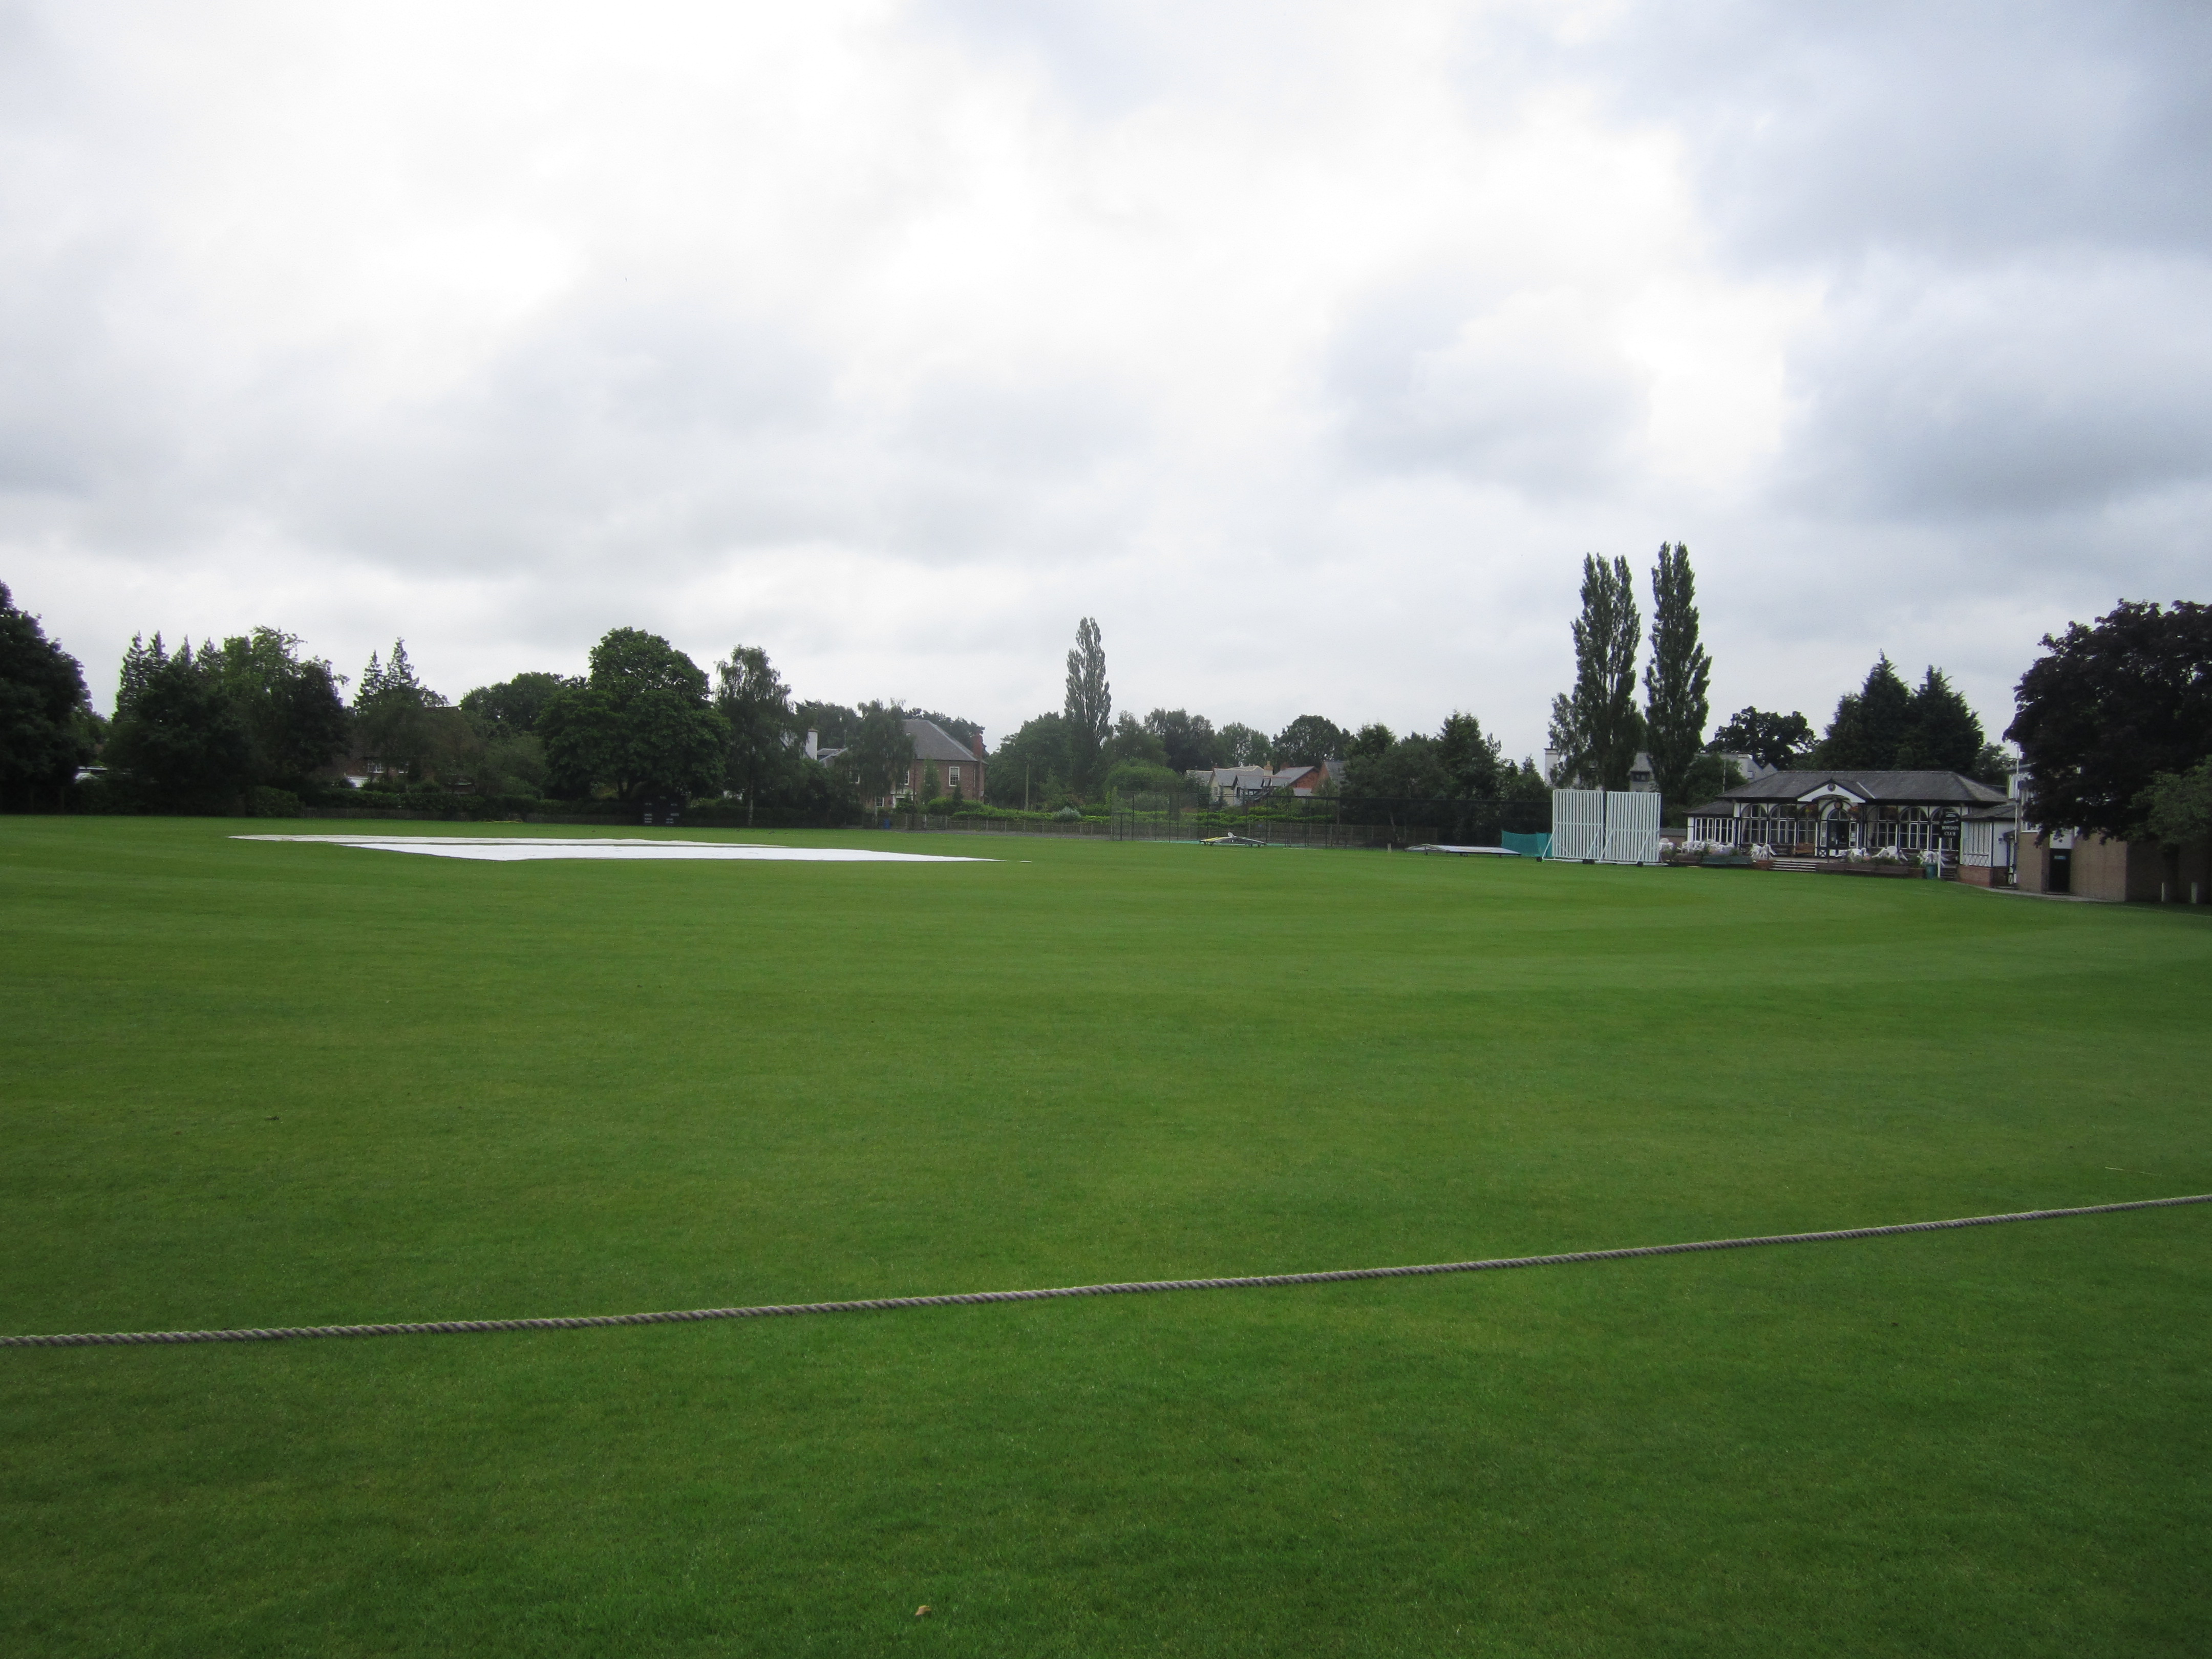 South Downs Road Cricket Ground, Bowdon